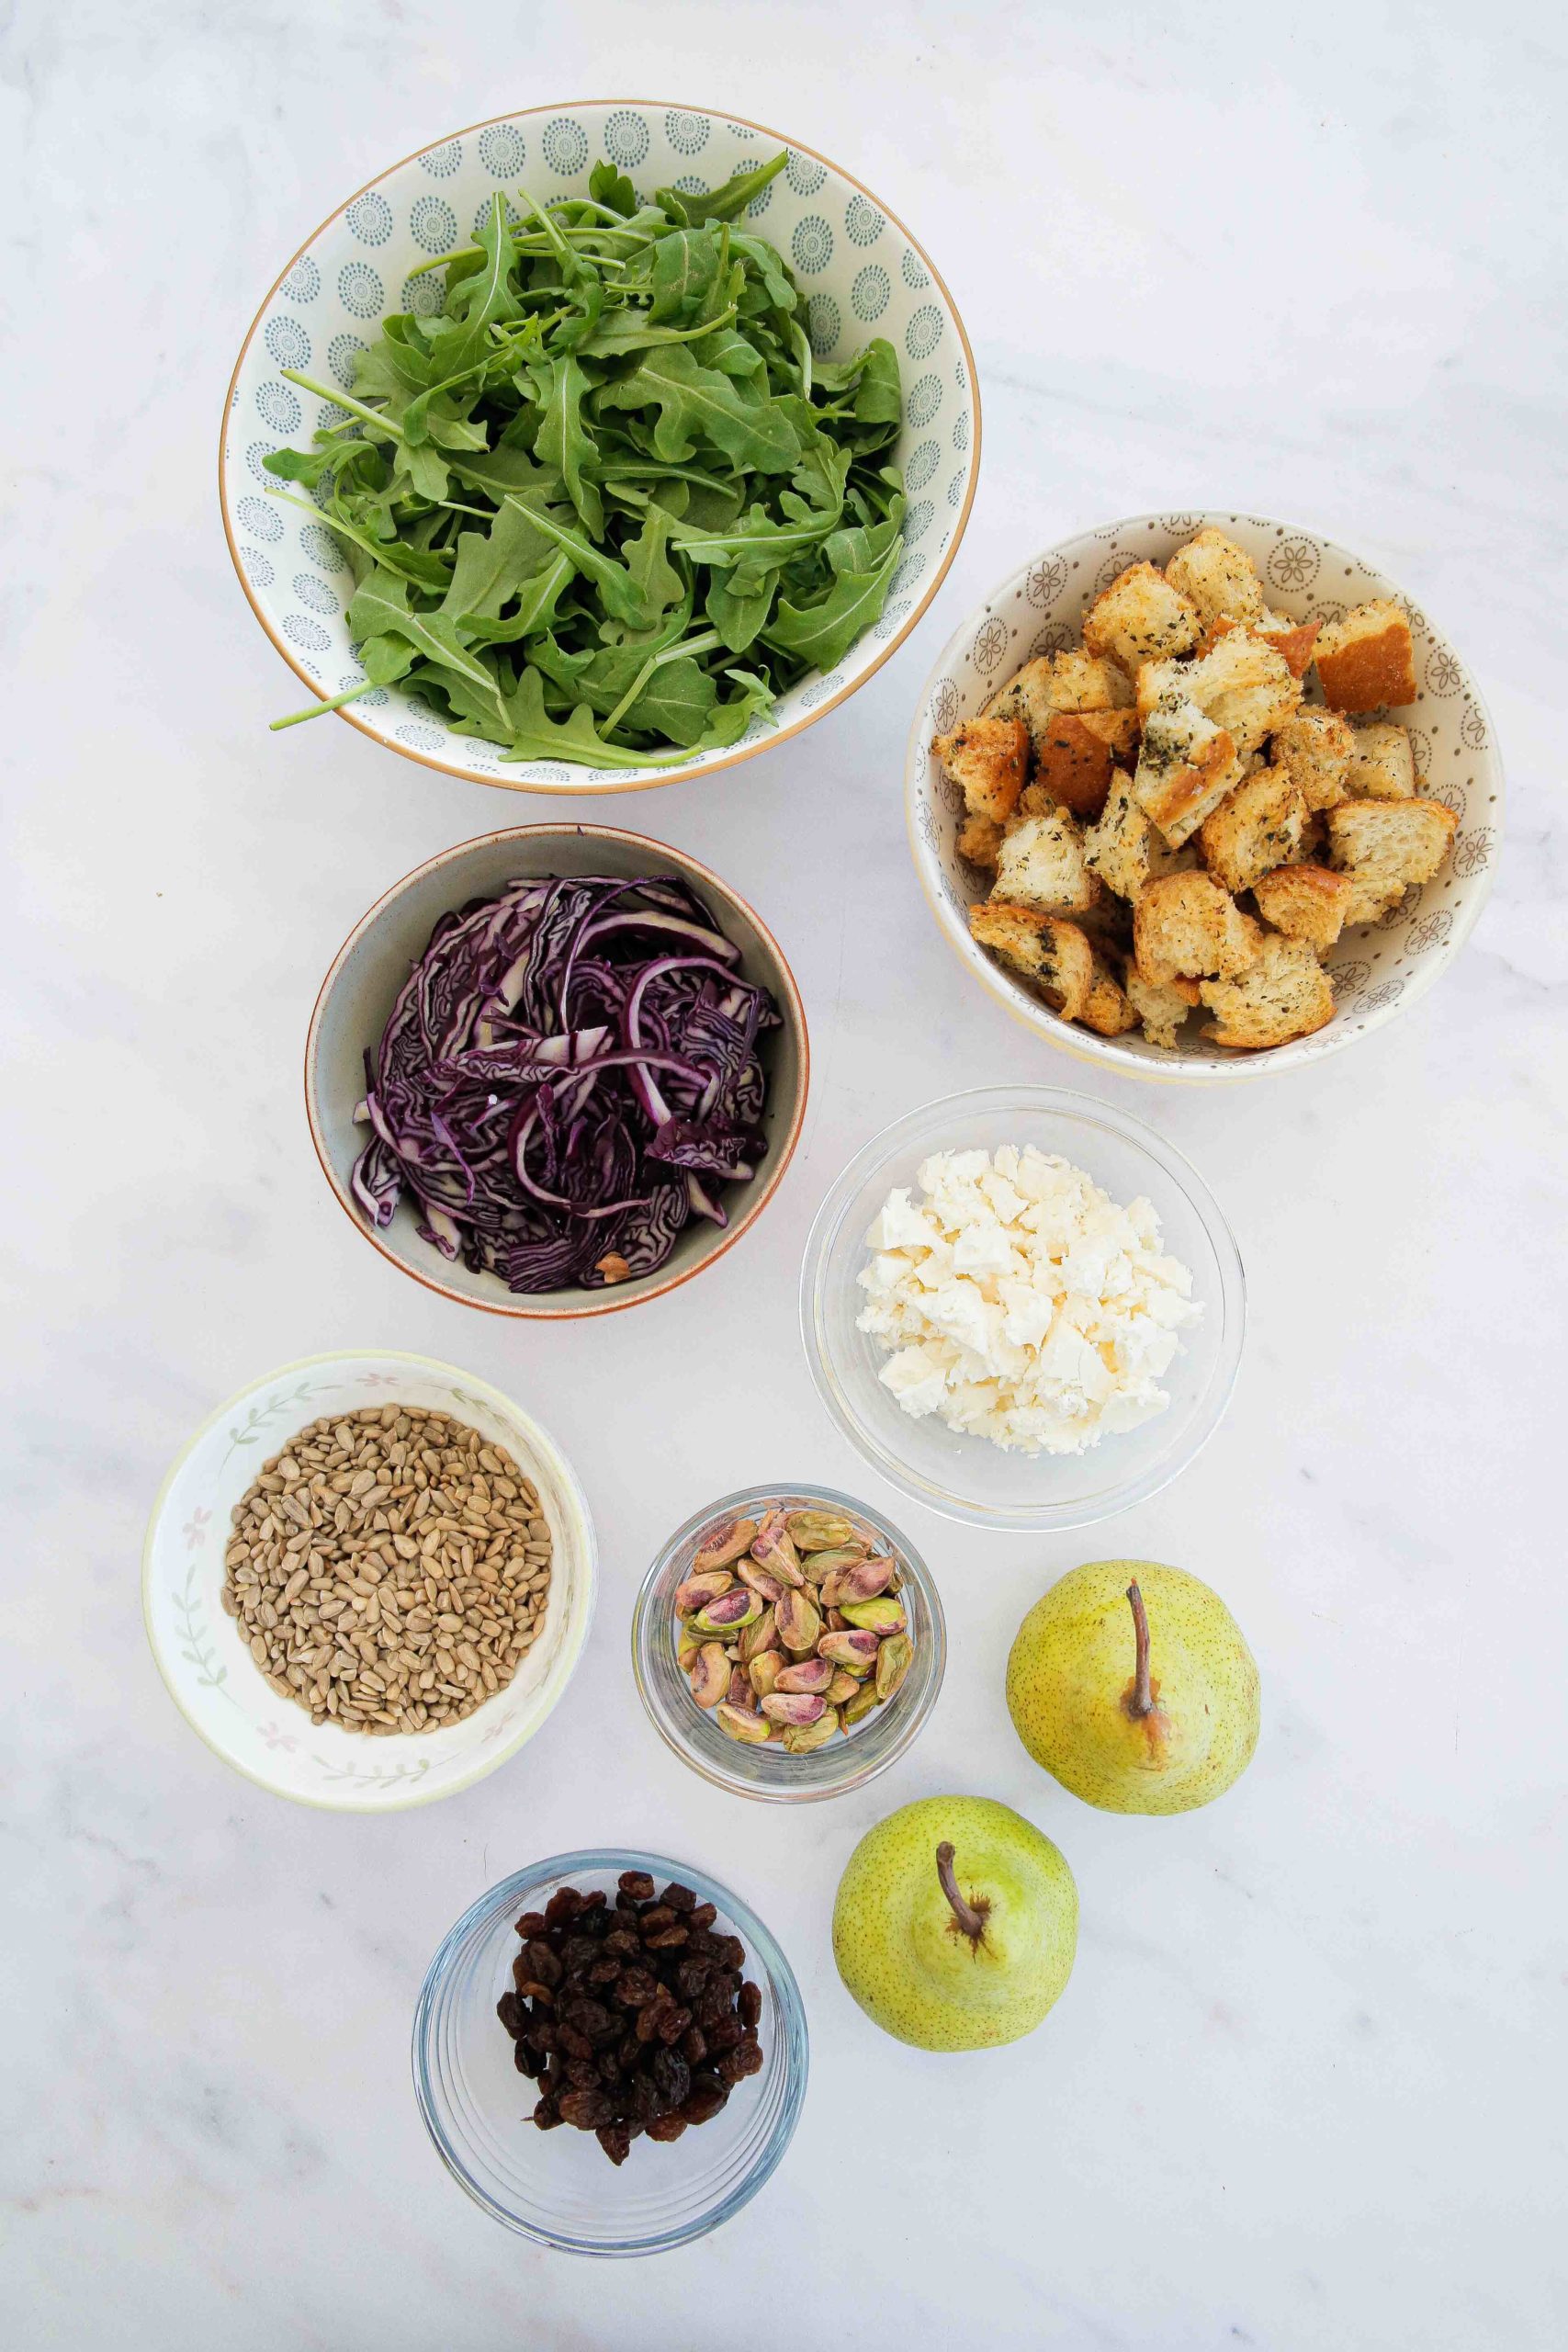 This pear salad will easily become a seasonal favourite! Made with roasted pears, red cabbage, homemade croutons and a tangy mustard dressing. Recipe on thecookandhim.com #pearsalad #redcabbage #arugula #rocket #stalebread #homemadecroutons